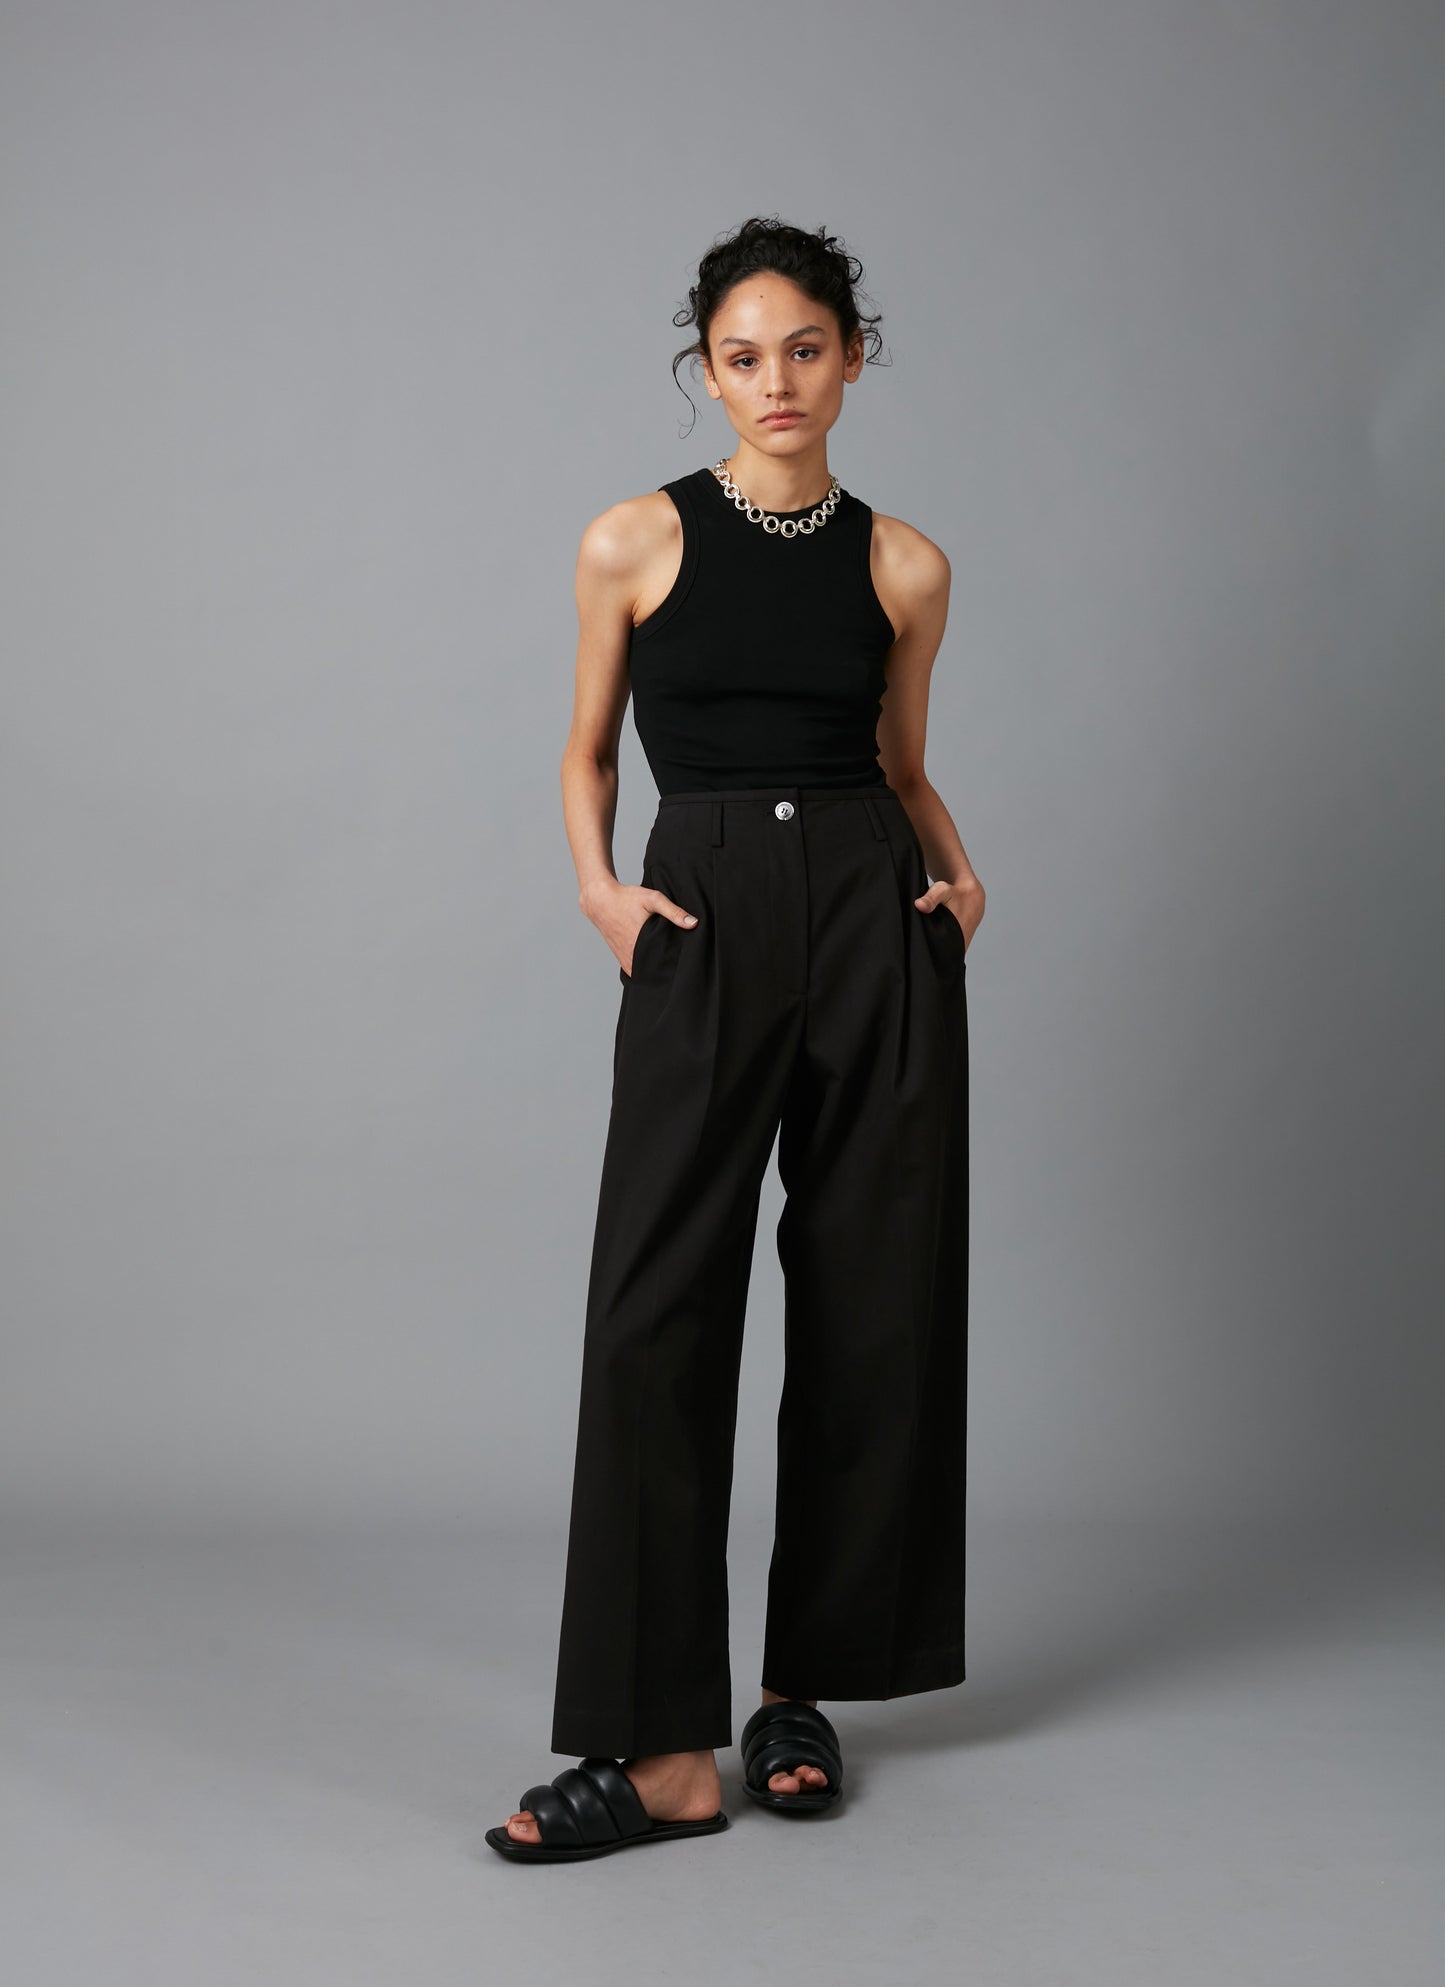 Front view of model with black tank and  Black Sculpture Cotton Tencel Pants